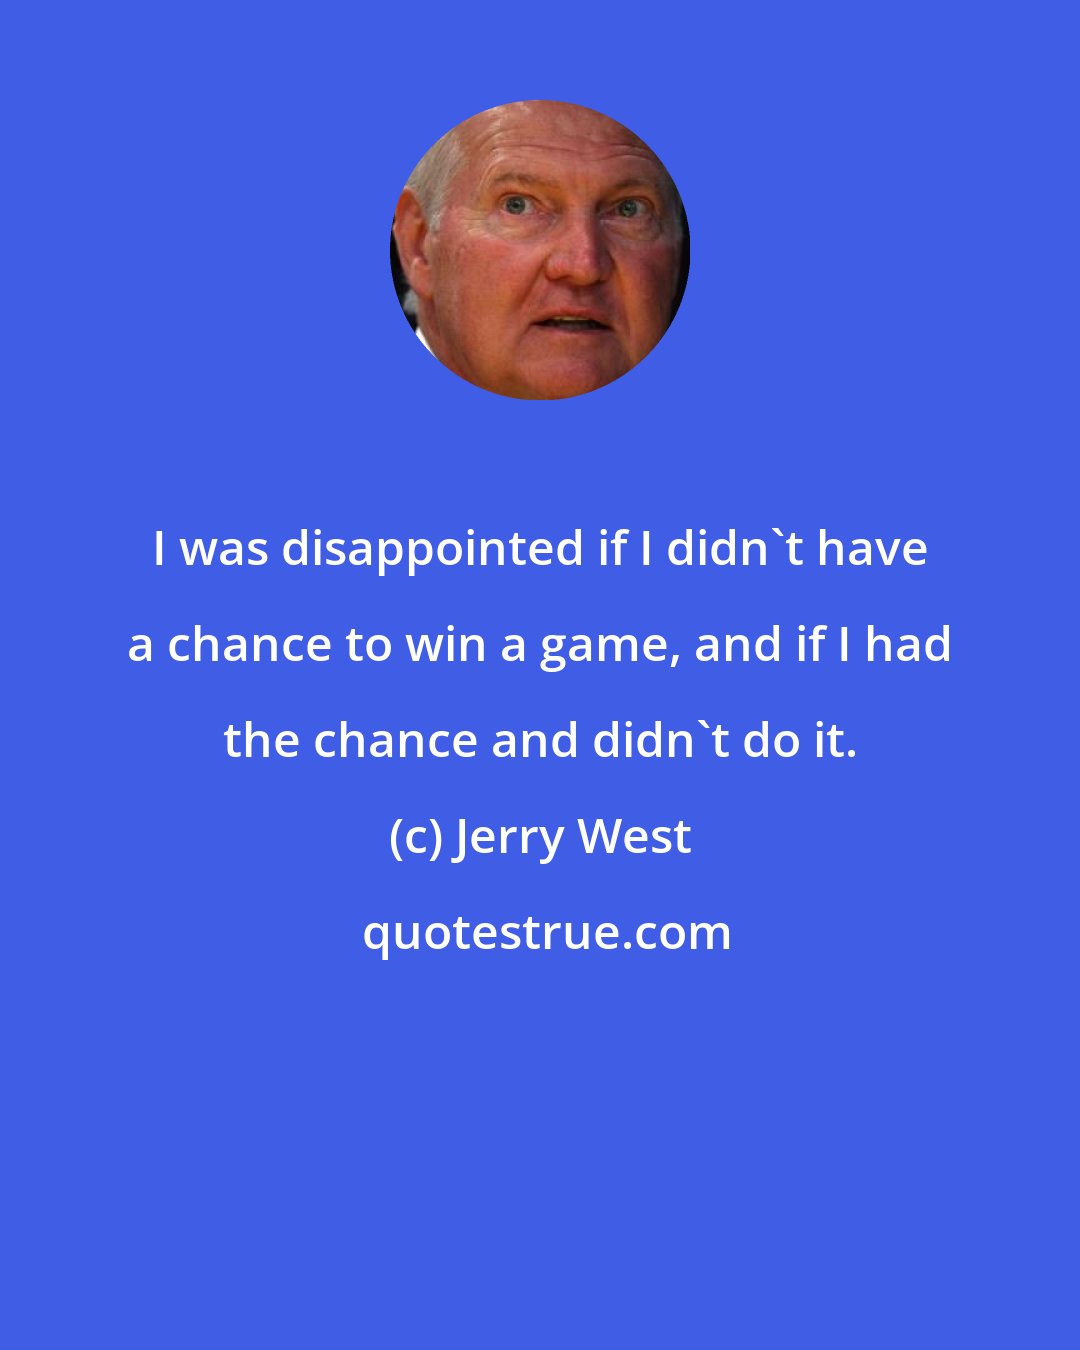 Jerry West: I was disappointed if I didn't have a chance to win a game, and if I had the chance and didn't do it.